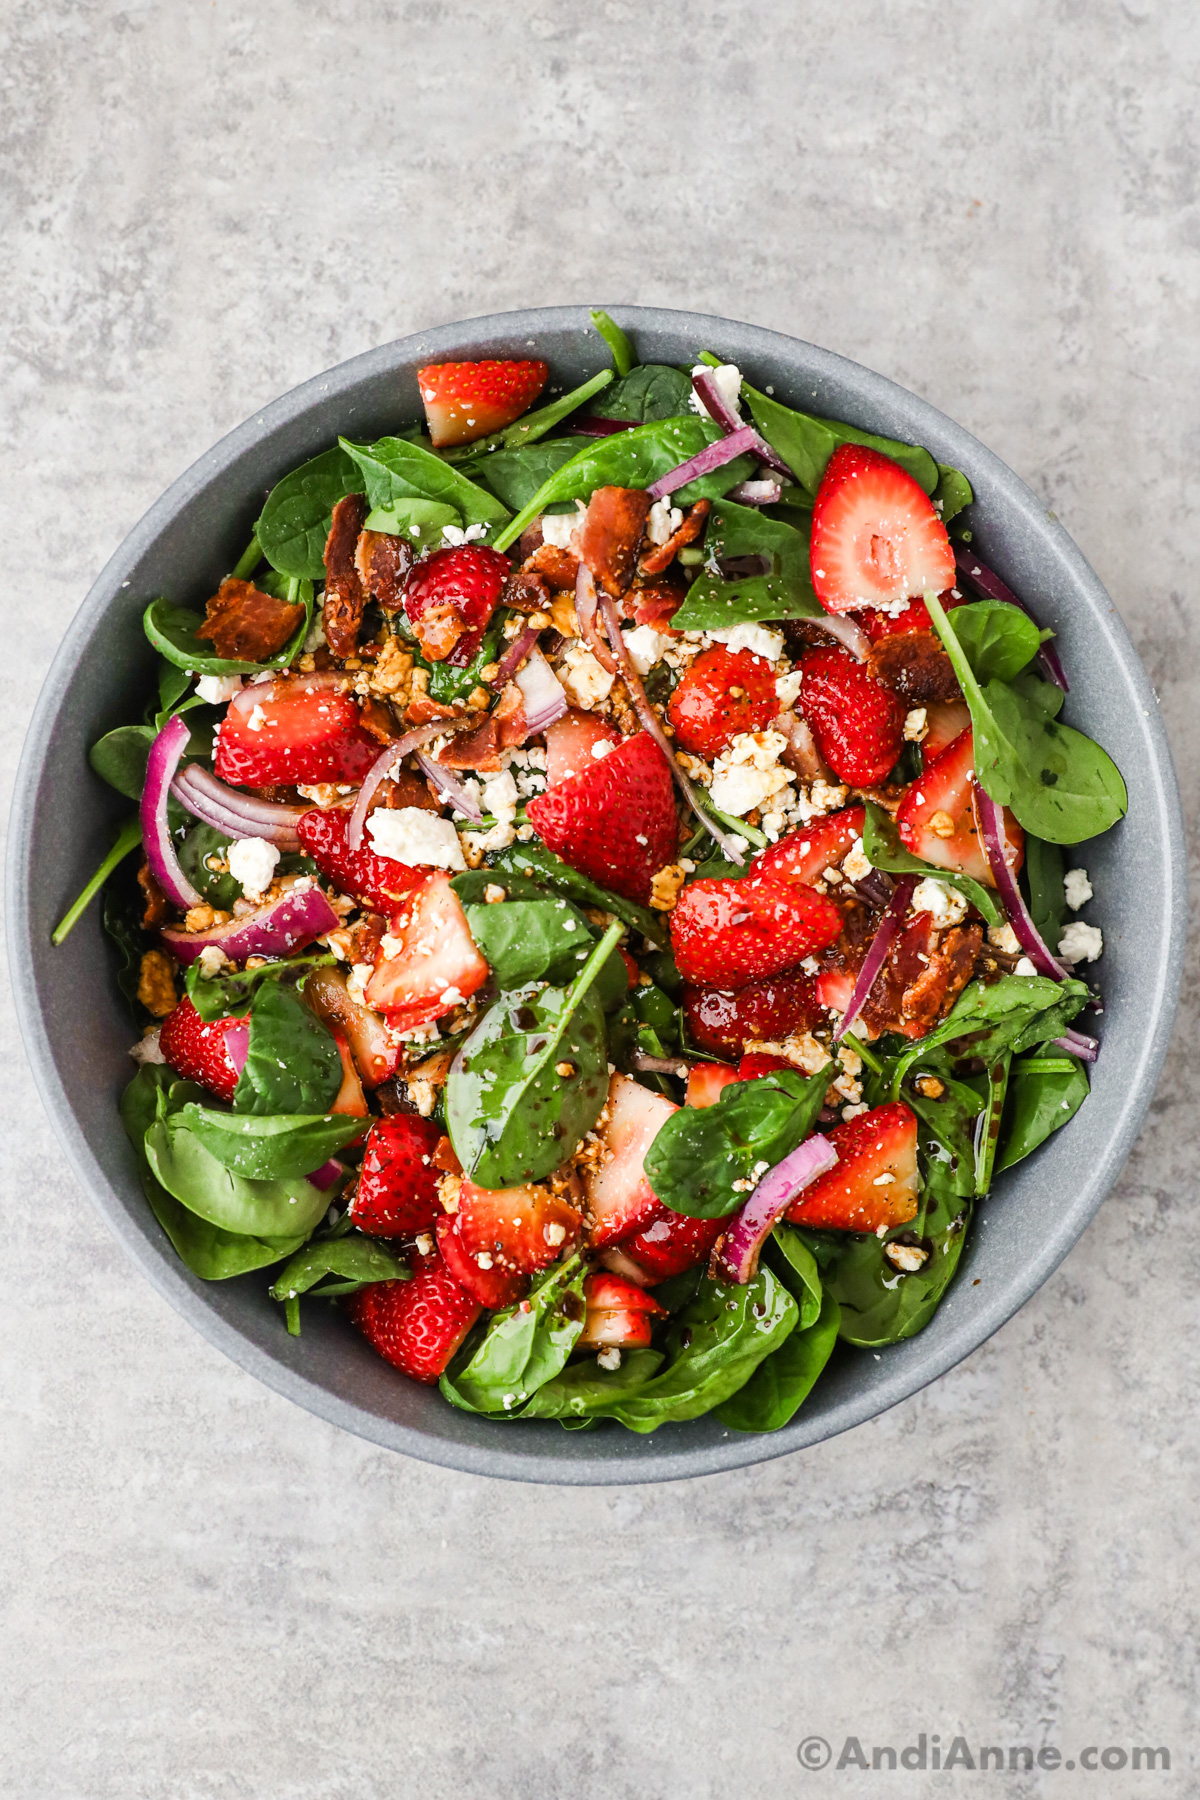 Salad dressing drizzled overtop of strawberry spinach salad.